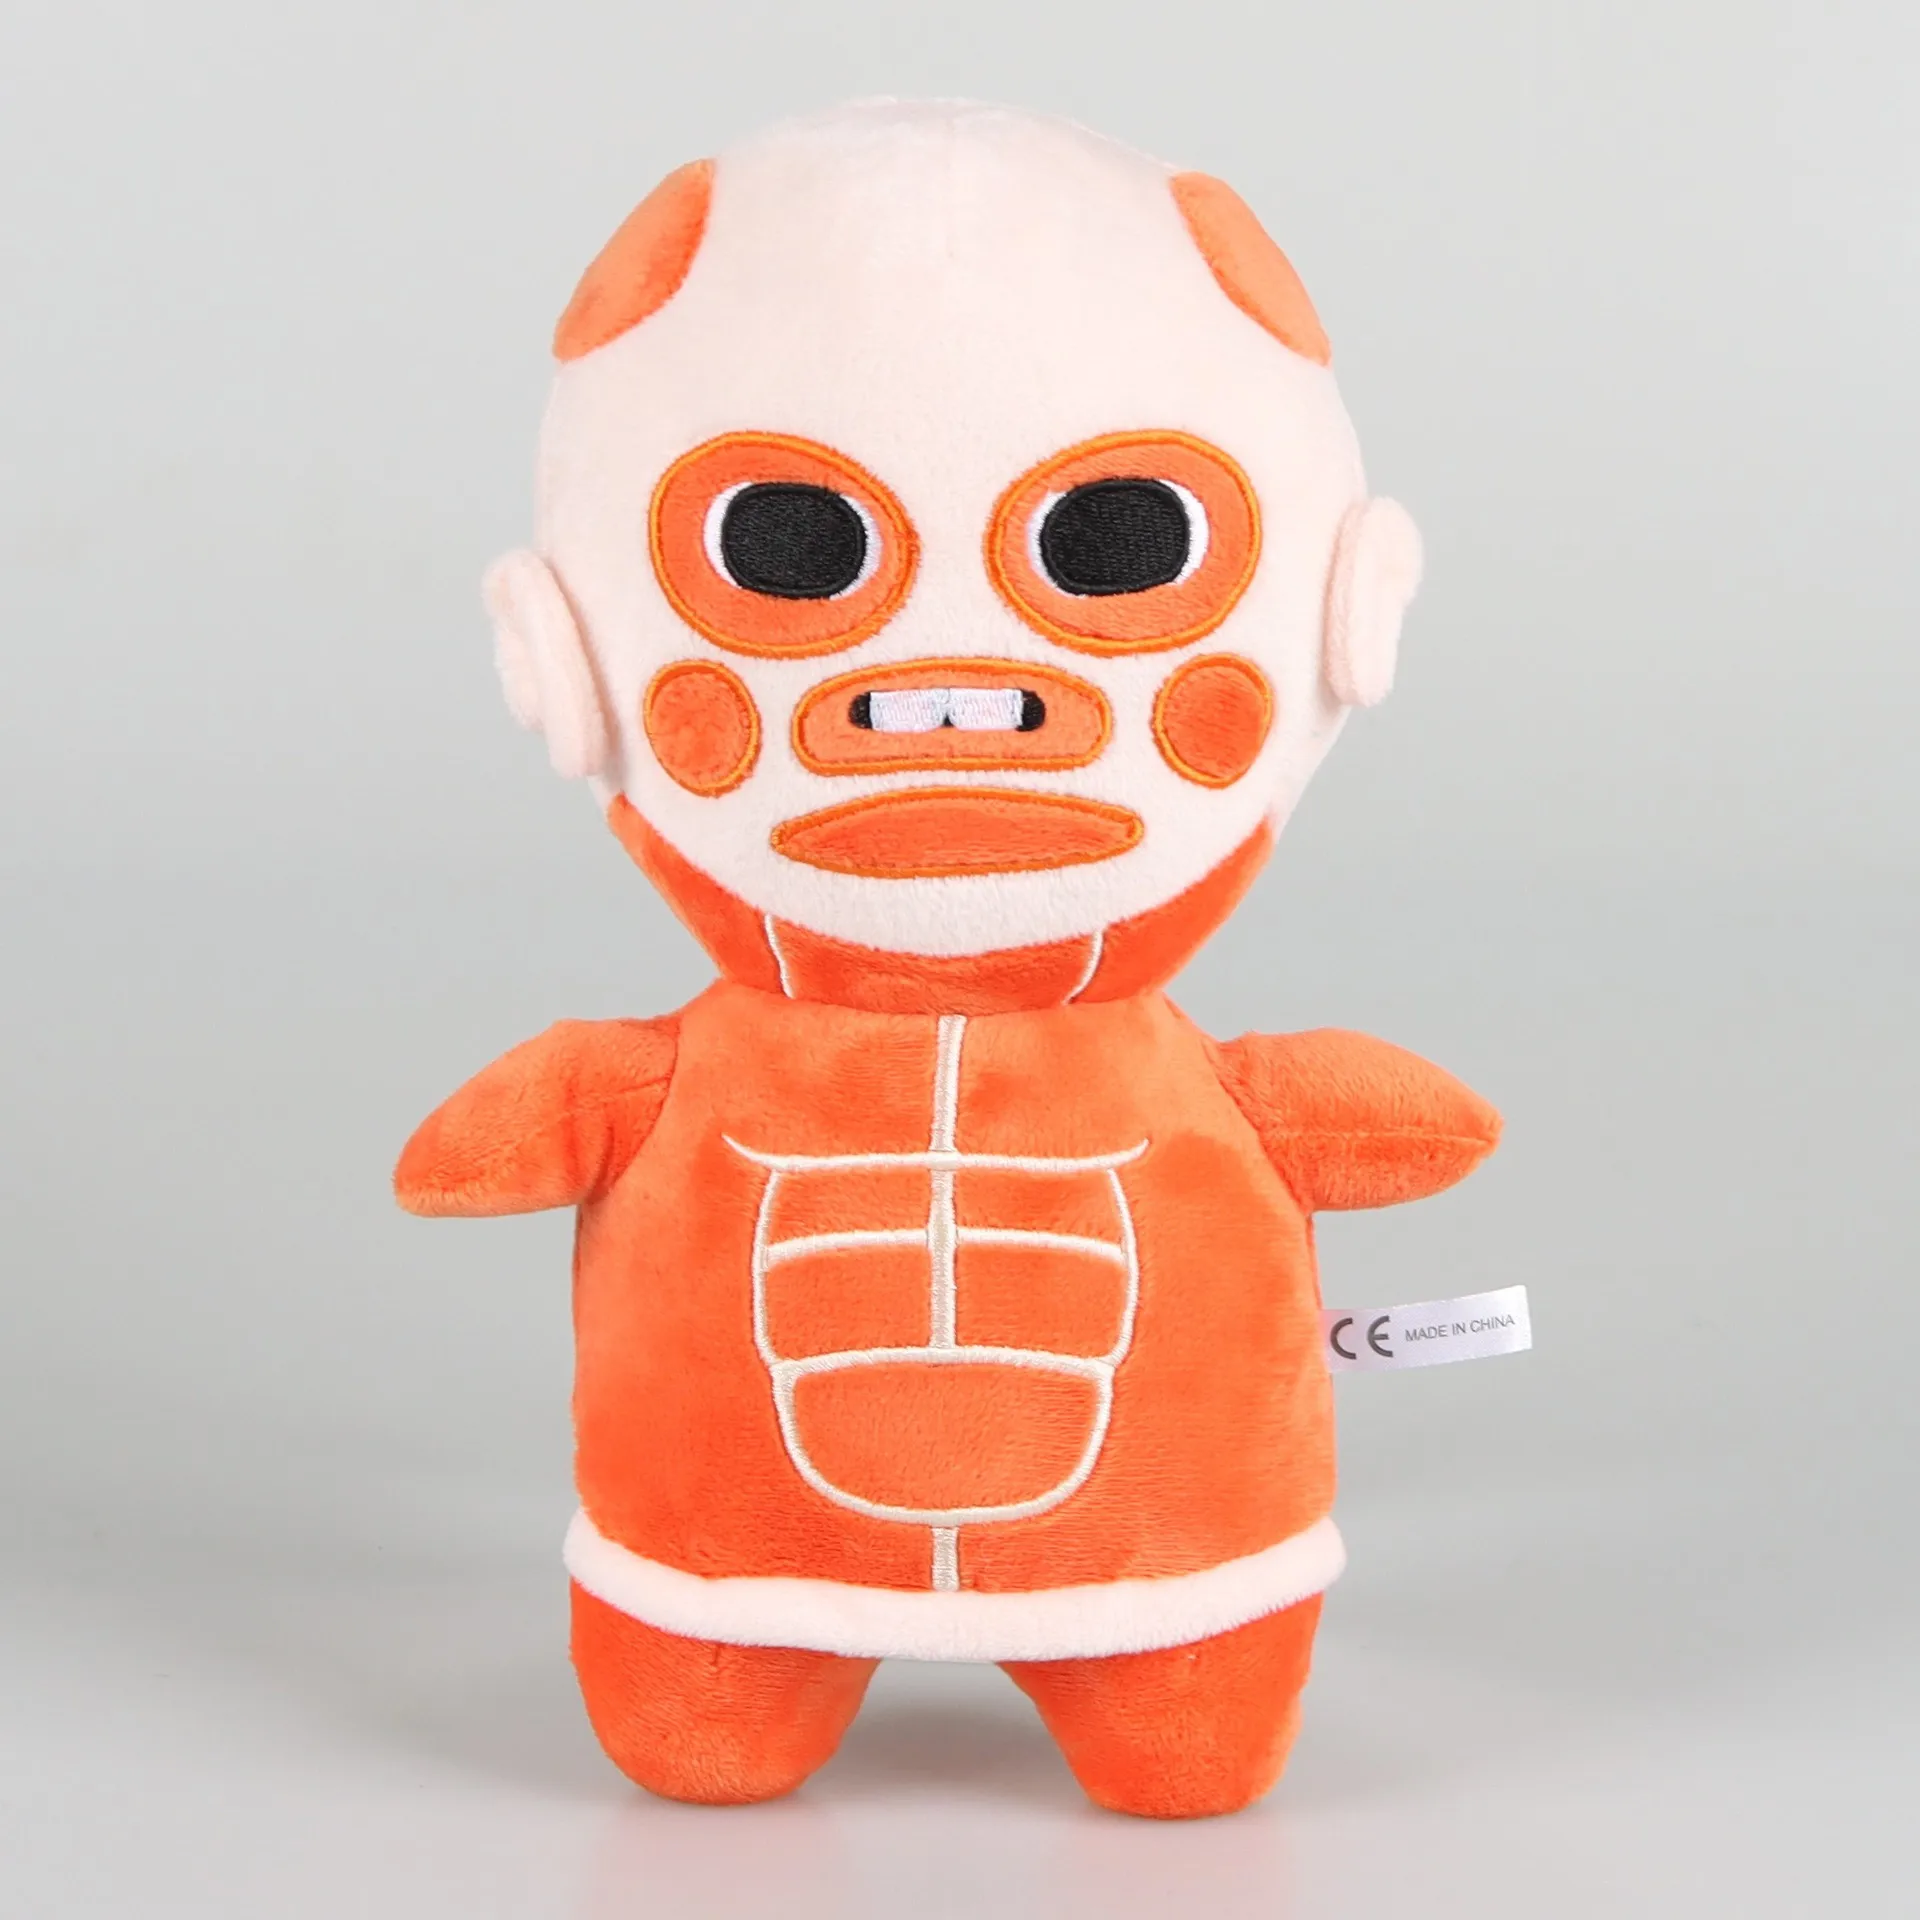 

25cm Chibi Titans 2 Plush Toy Cartoon Animation Attack On Titan Cute Stuffed Soft Toy Dolls Christmas Gift For Children Gifts